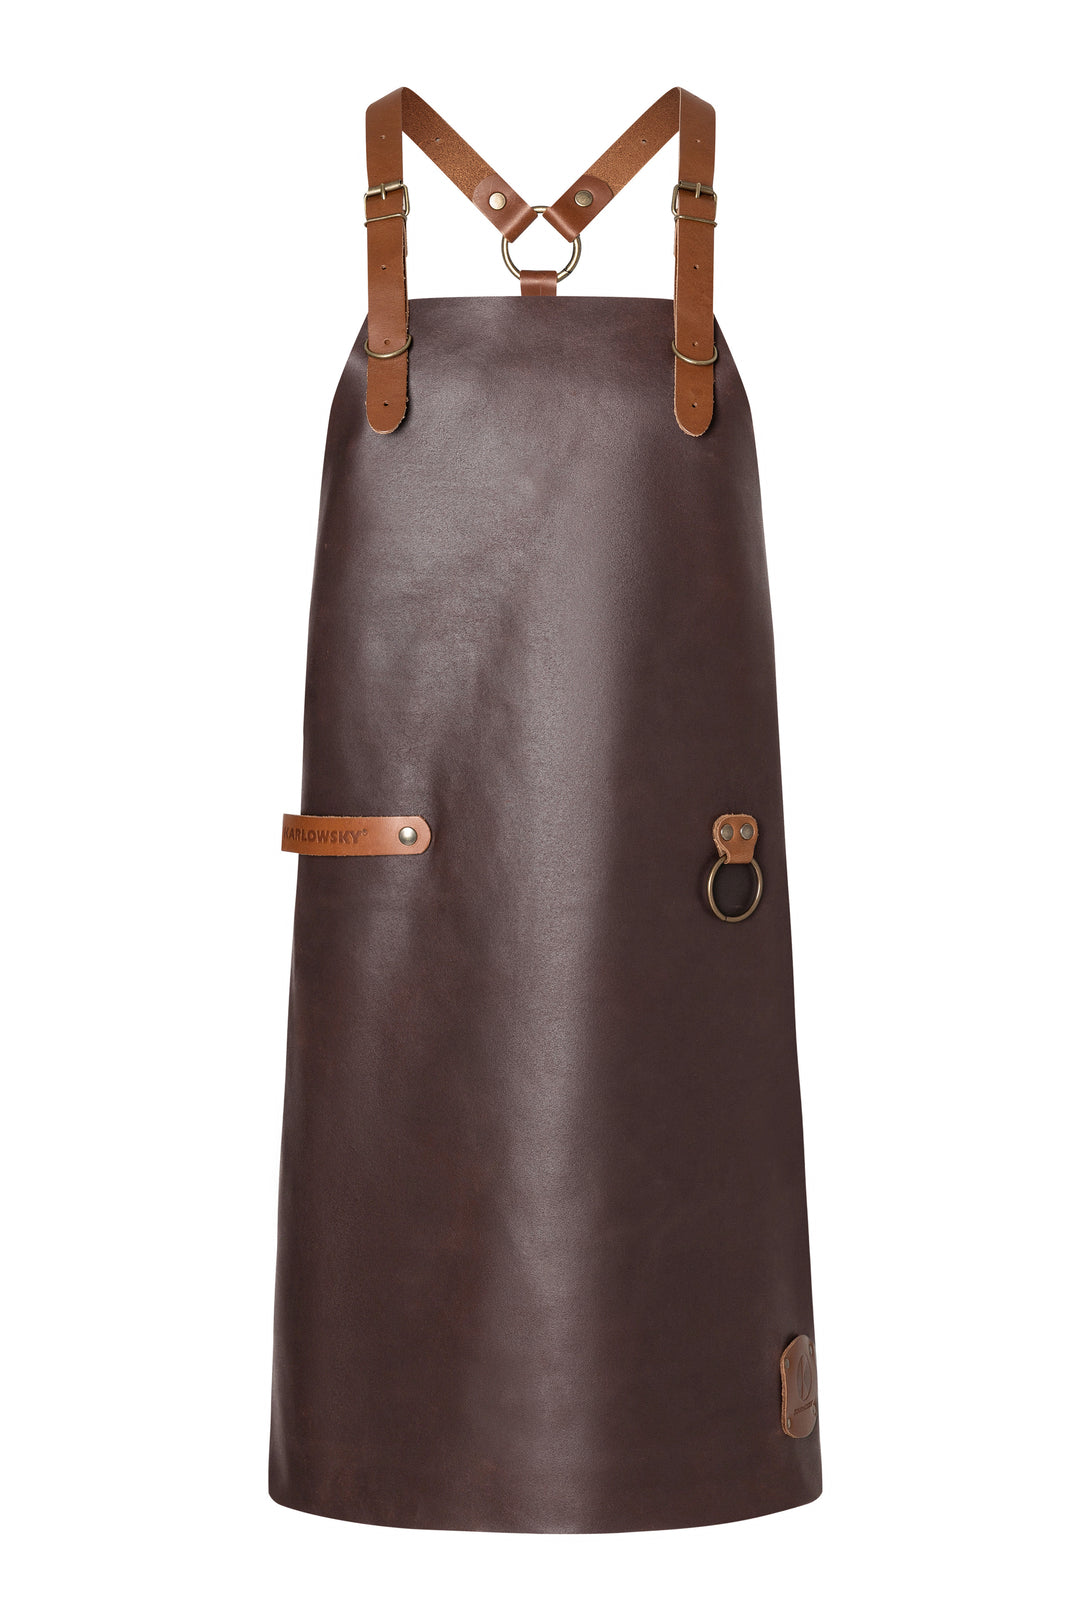 Karlowsky LS 35 Leather Apron